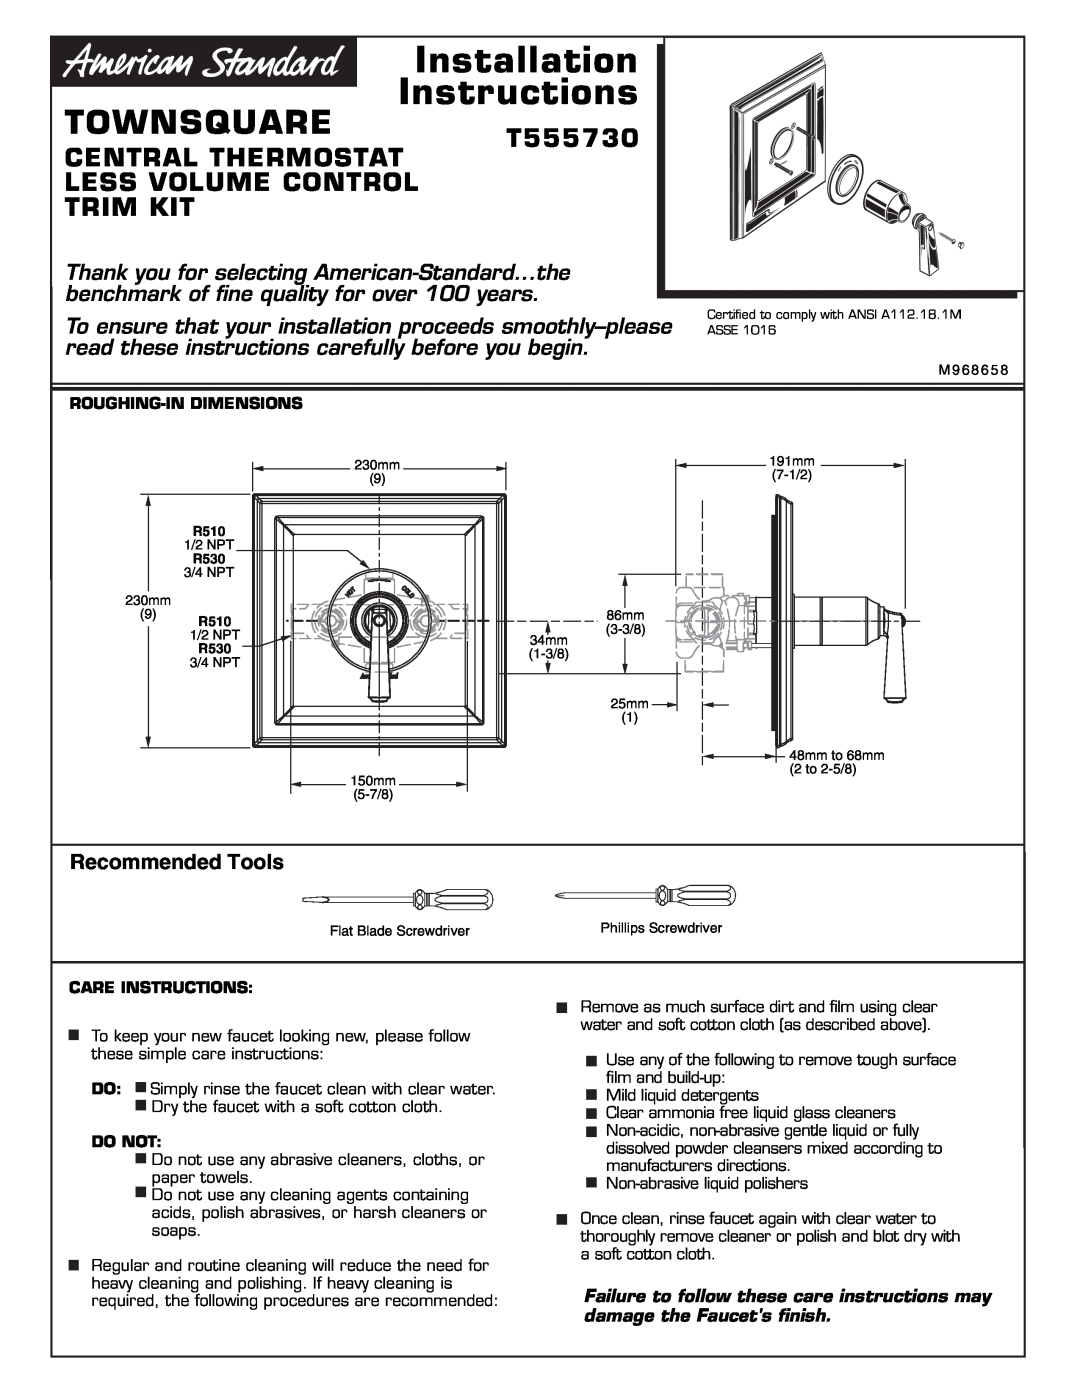 American Standard installation instructions TOWNSQUARE T555730, Central Thermostat Less Volume Control Trim Kit 